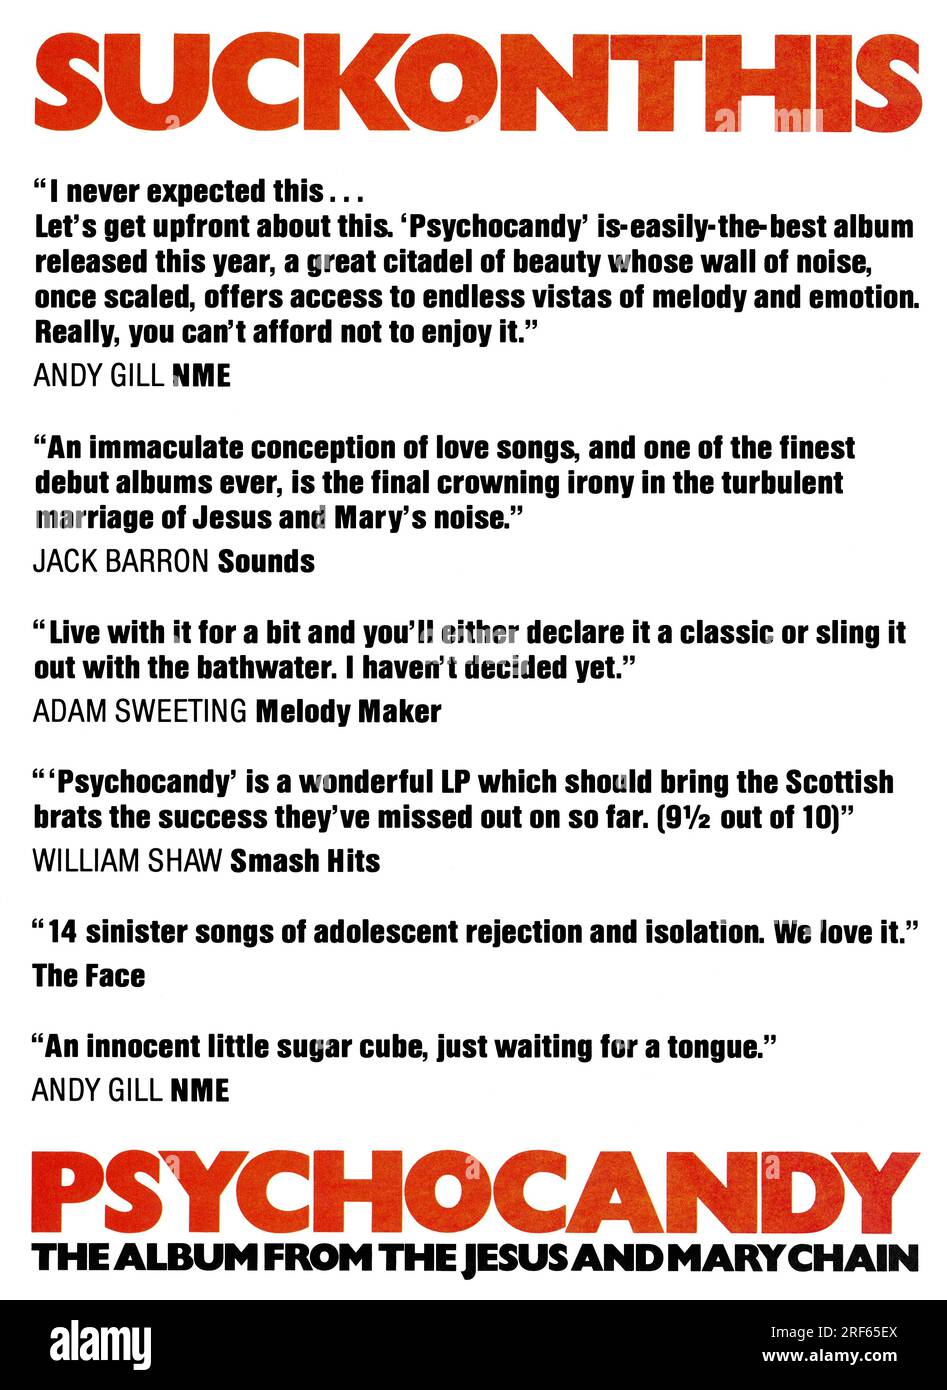 January 1986 British advertisement for the album Psychocandy by the Jesus And Mary Chain. Stock Photo